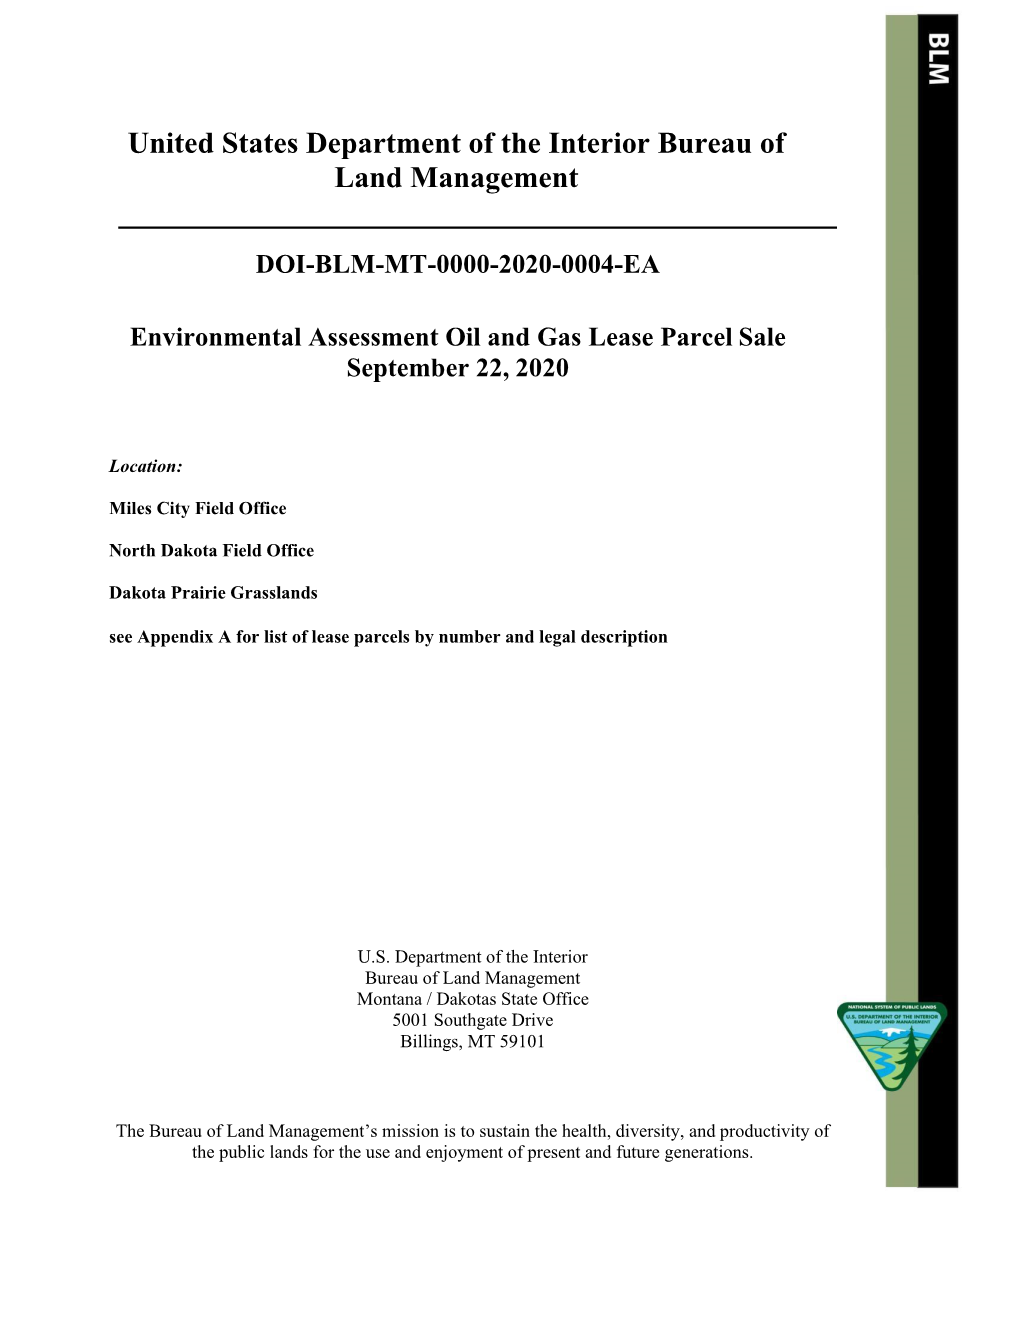 Environmental Assessment Oil and Gas Lease Parcel Sale September 22 2020